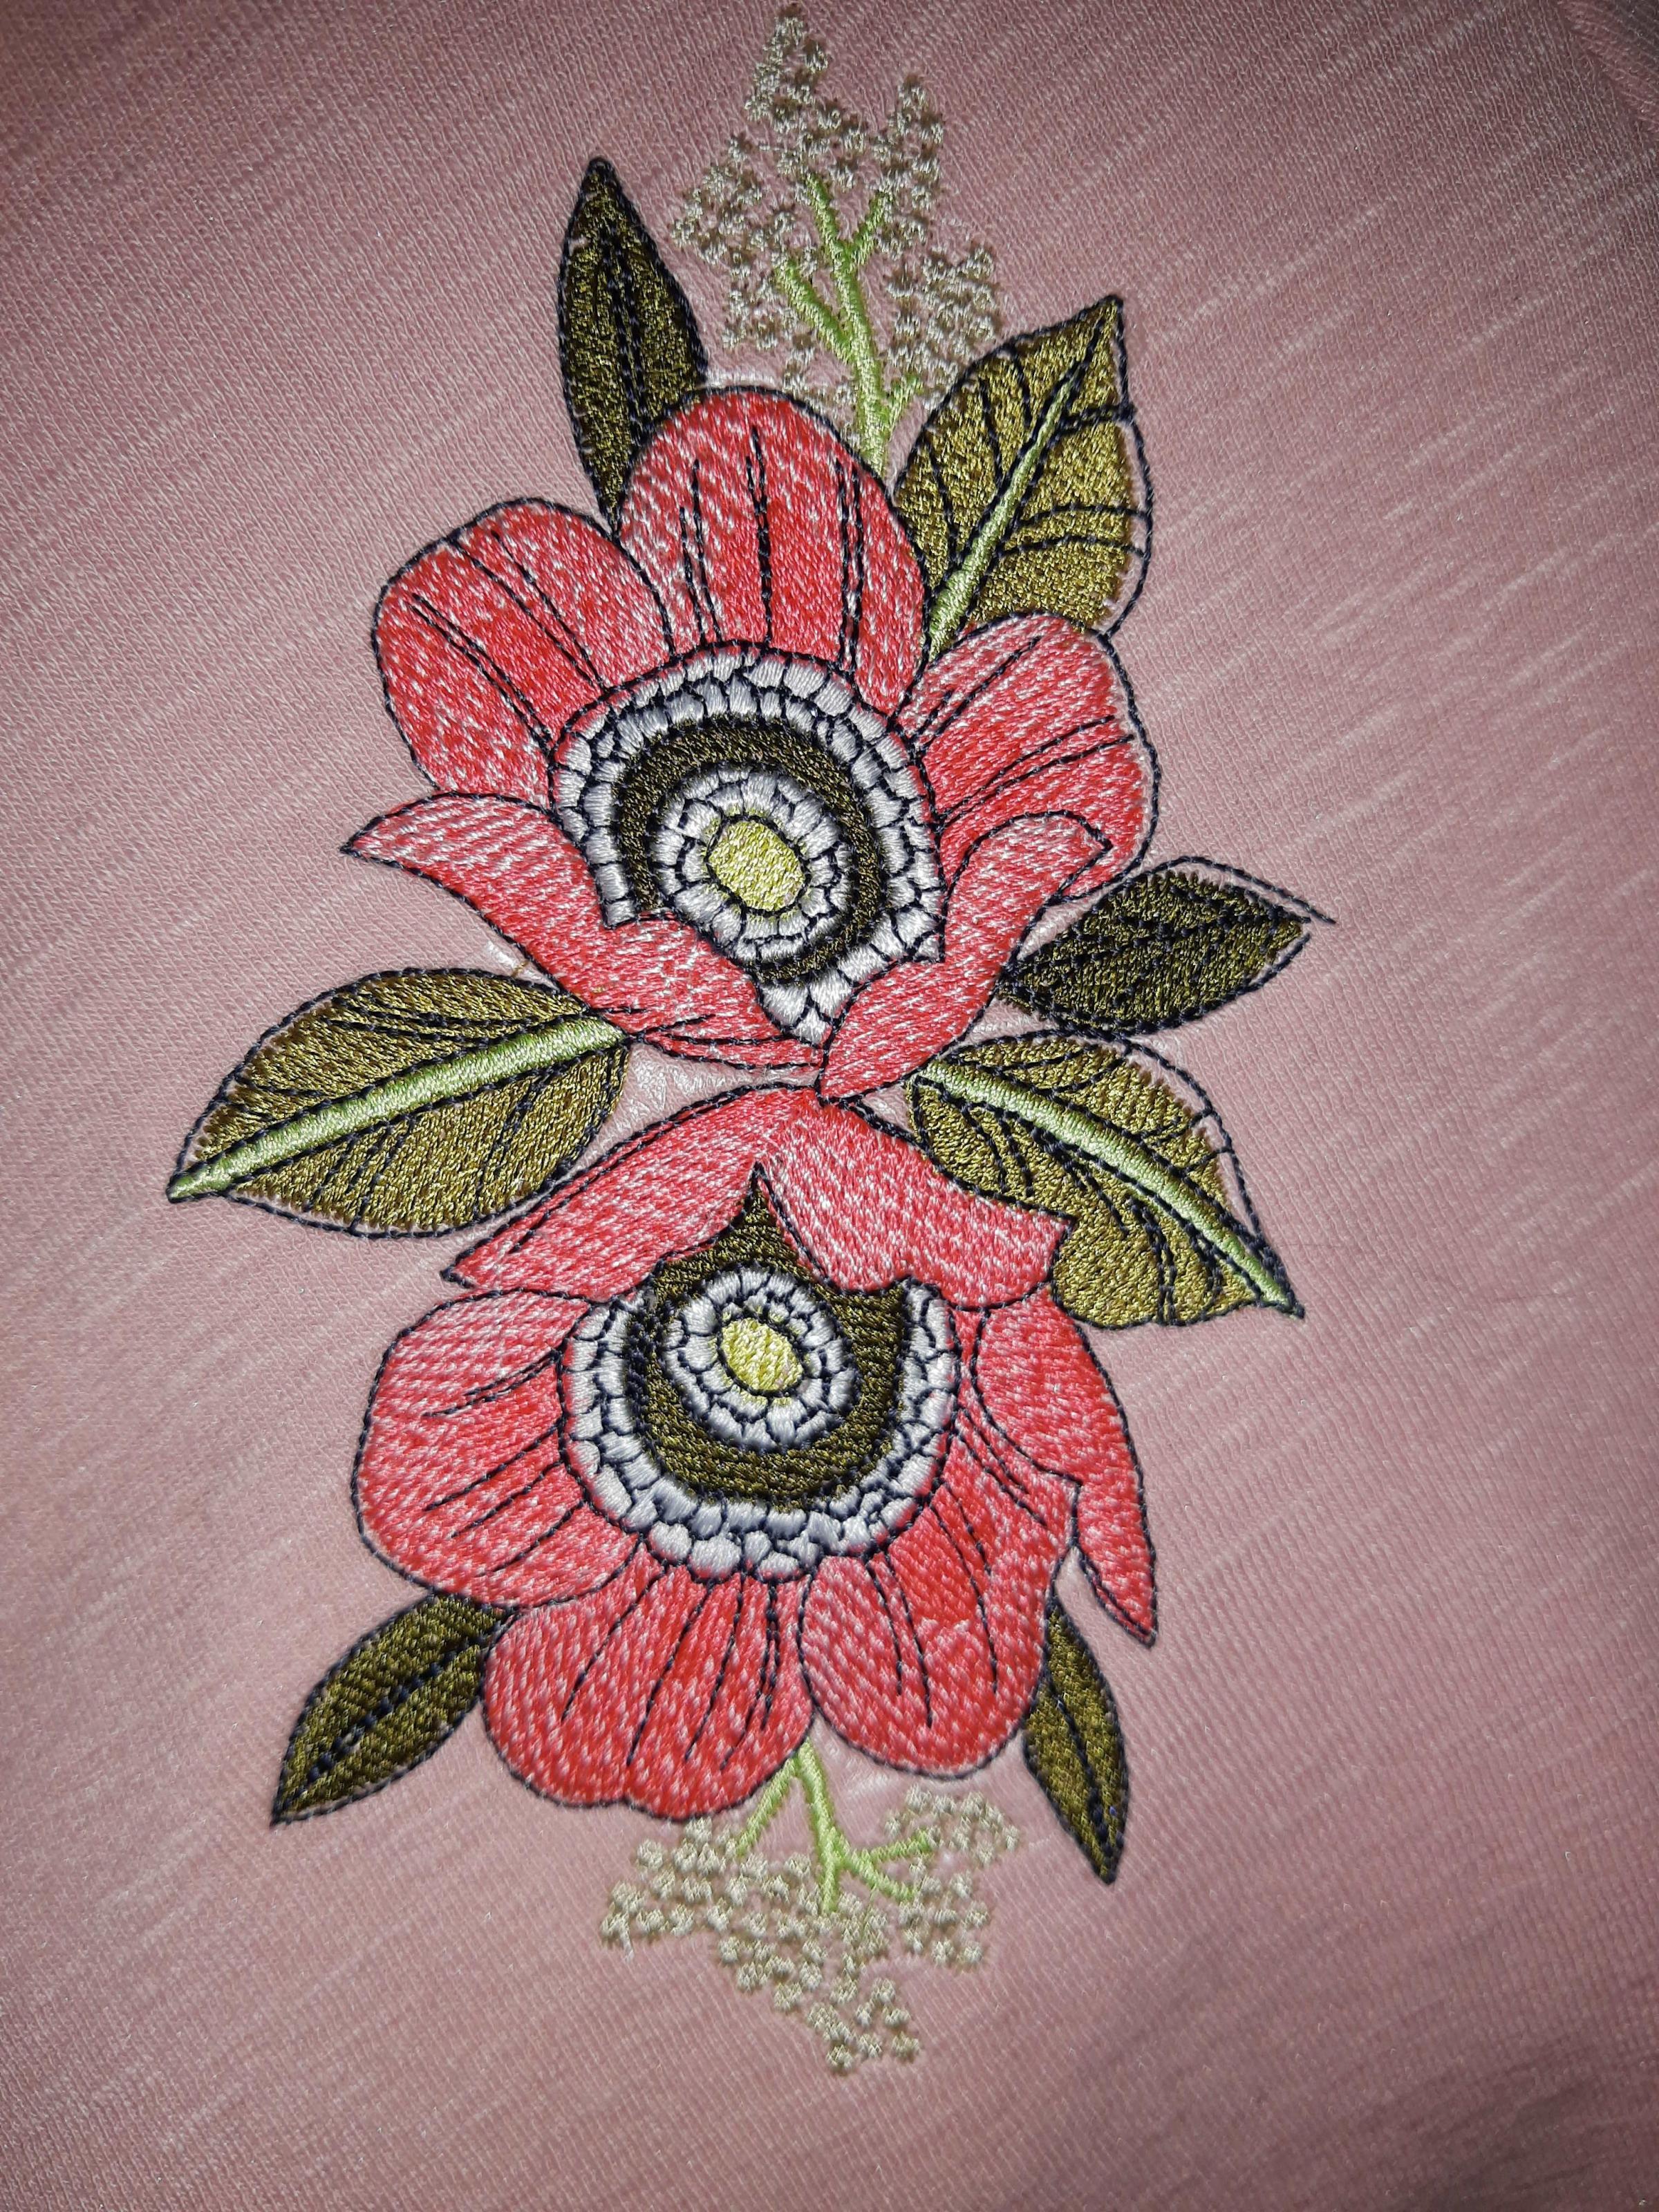 Elegant Flowers Hand Embroidery Patterns